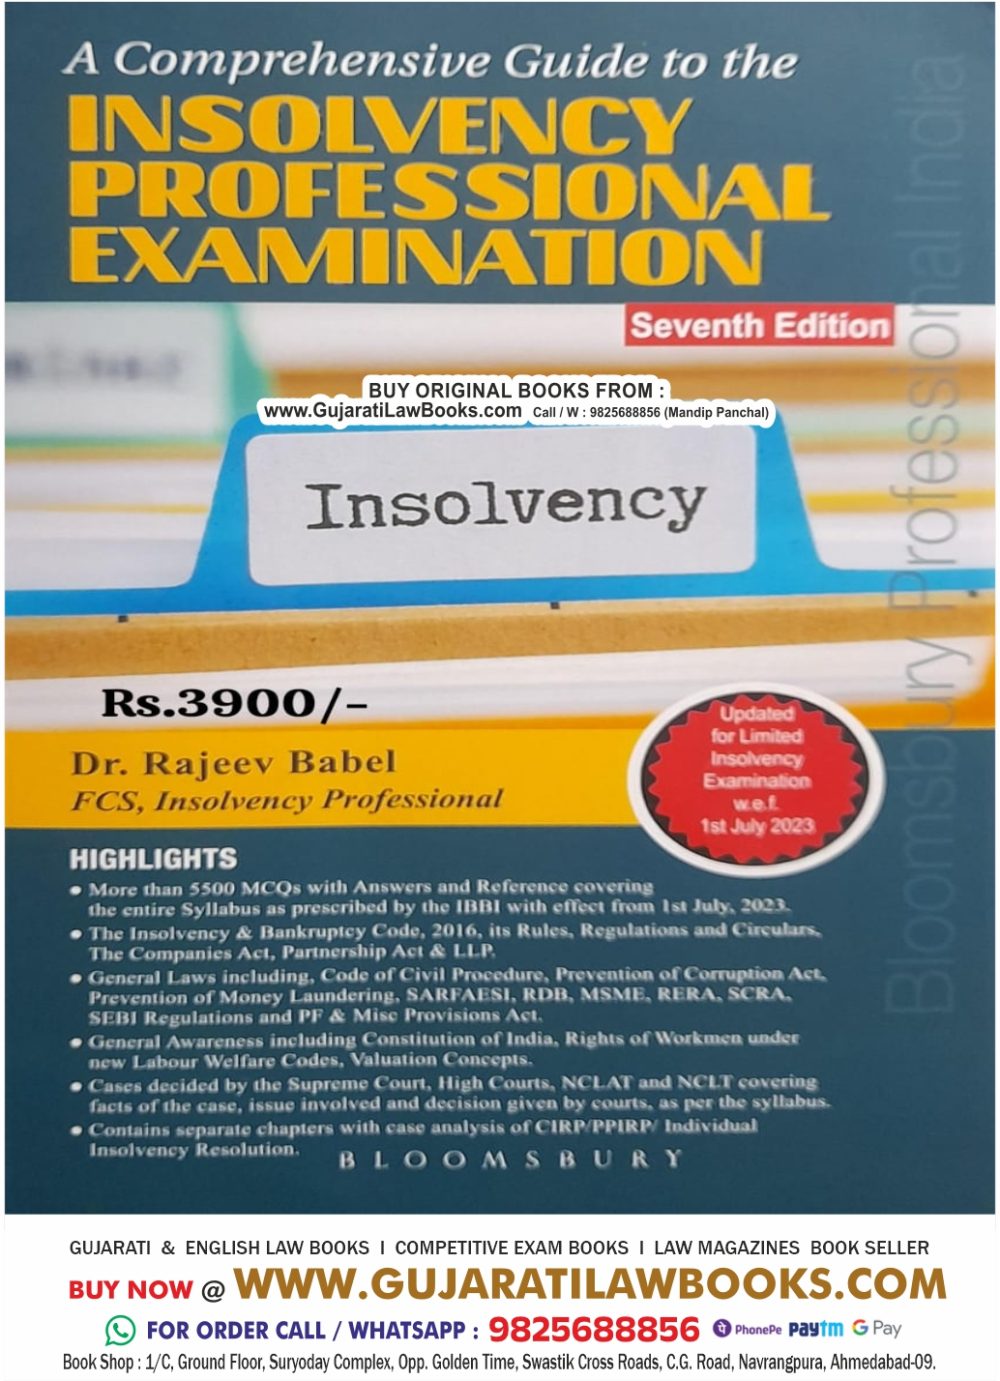 A Comprehensive Guide to the INSOLVENCY PROFESSIONAL EXAMINATION - Latest 7th Edition 2024 Bloomsbury